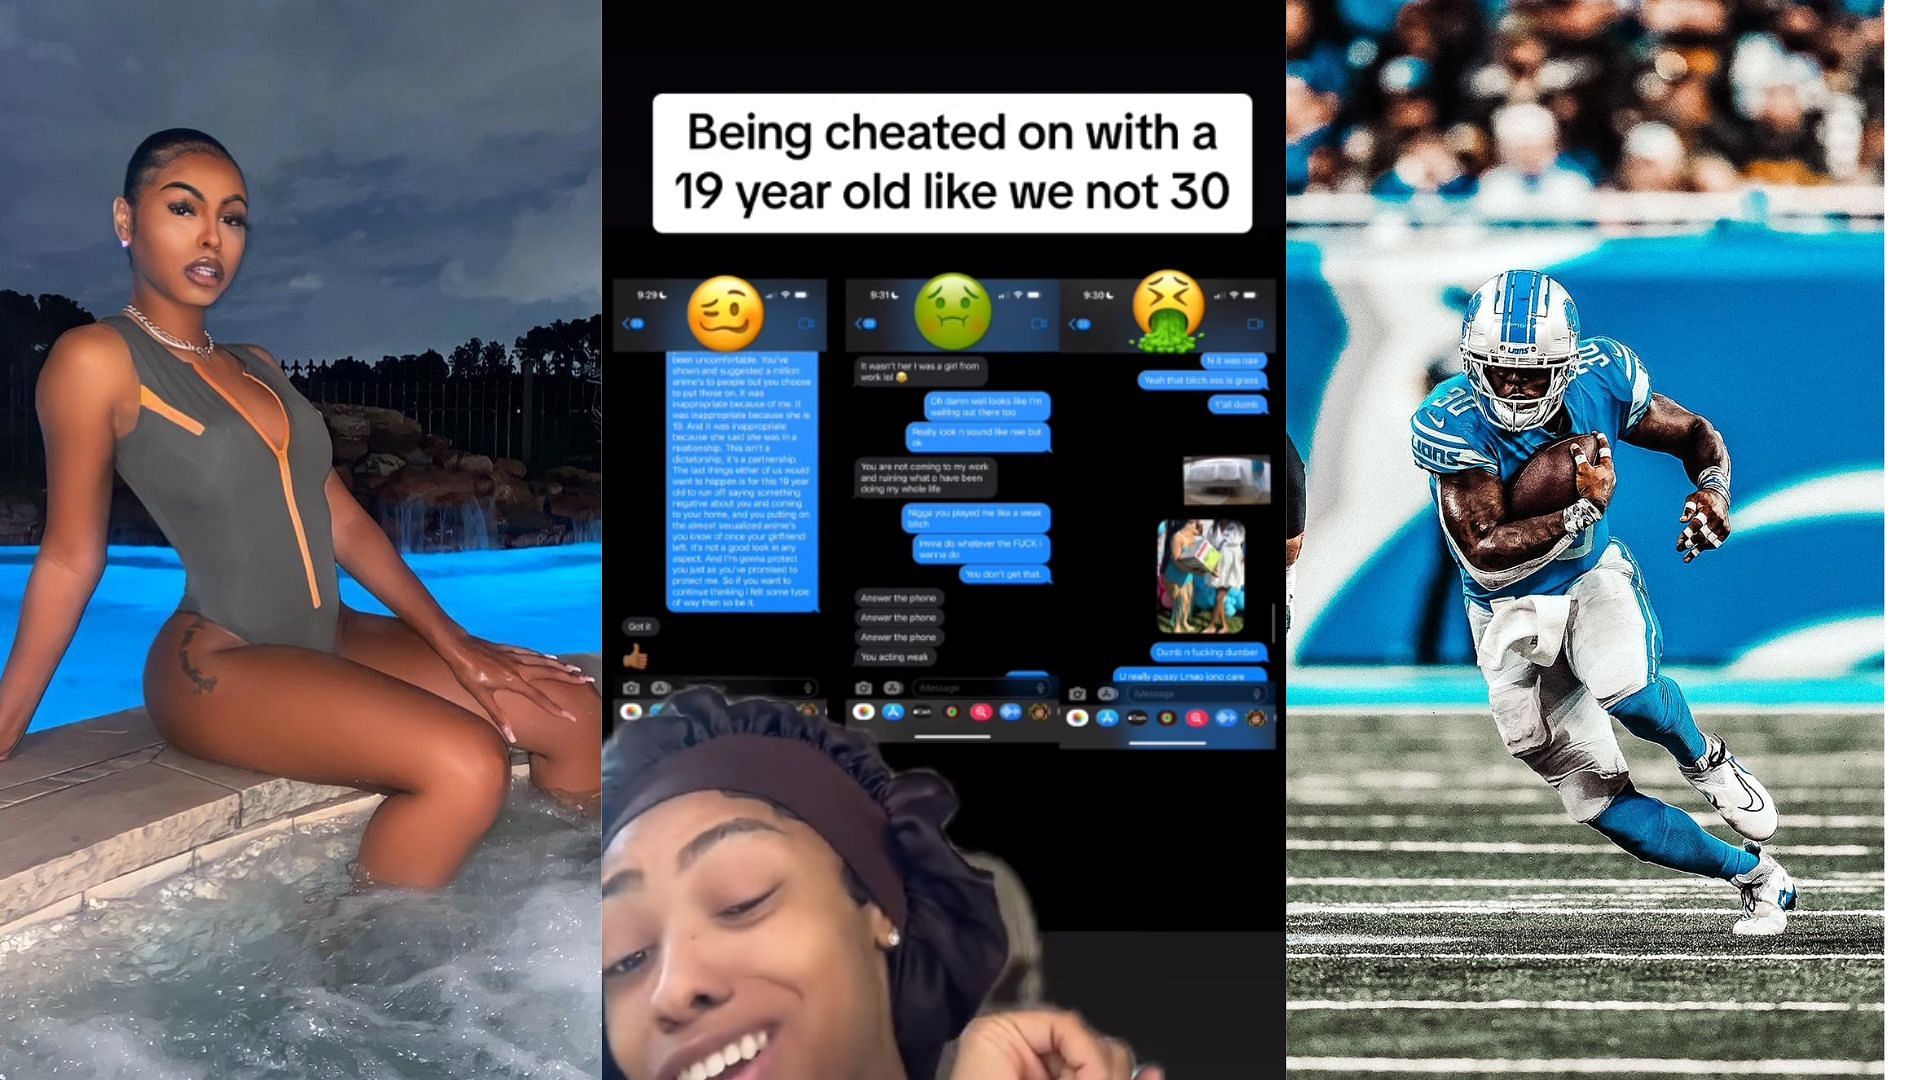 Jamaal Williams gets in trouble as his GF exposes a scandalous truth.